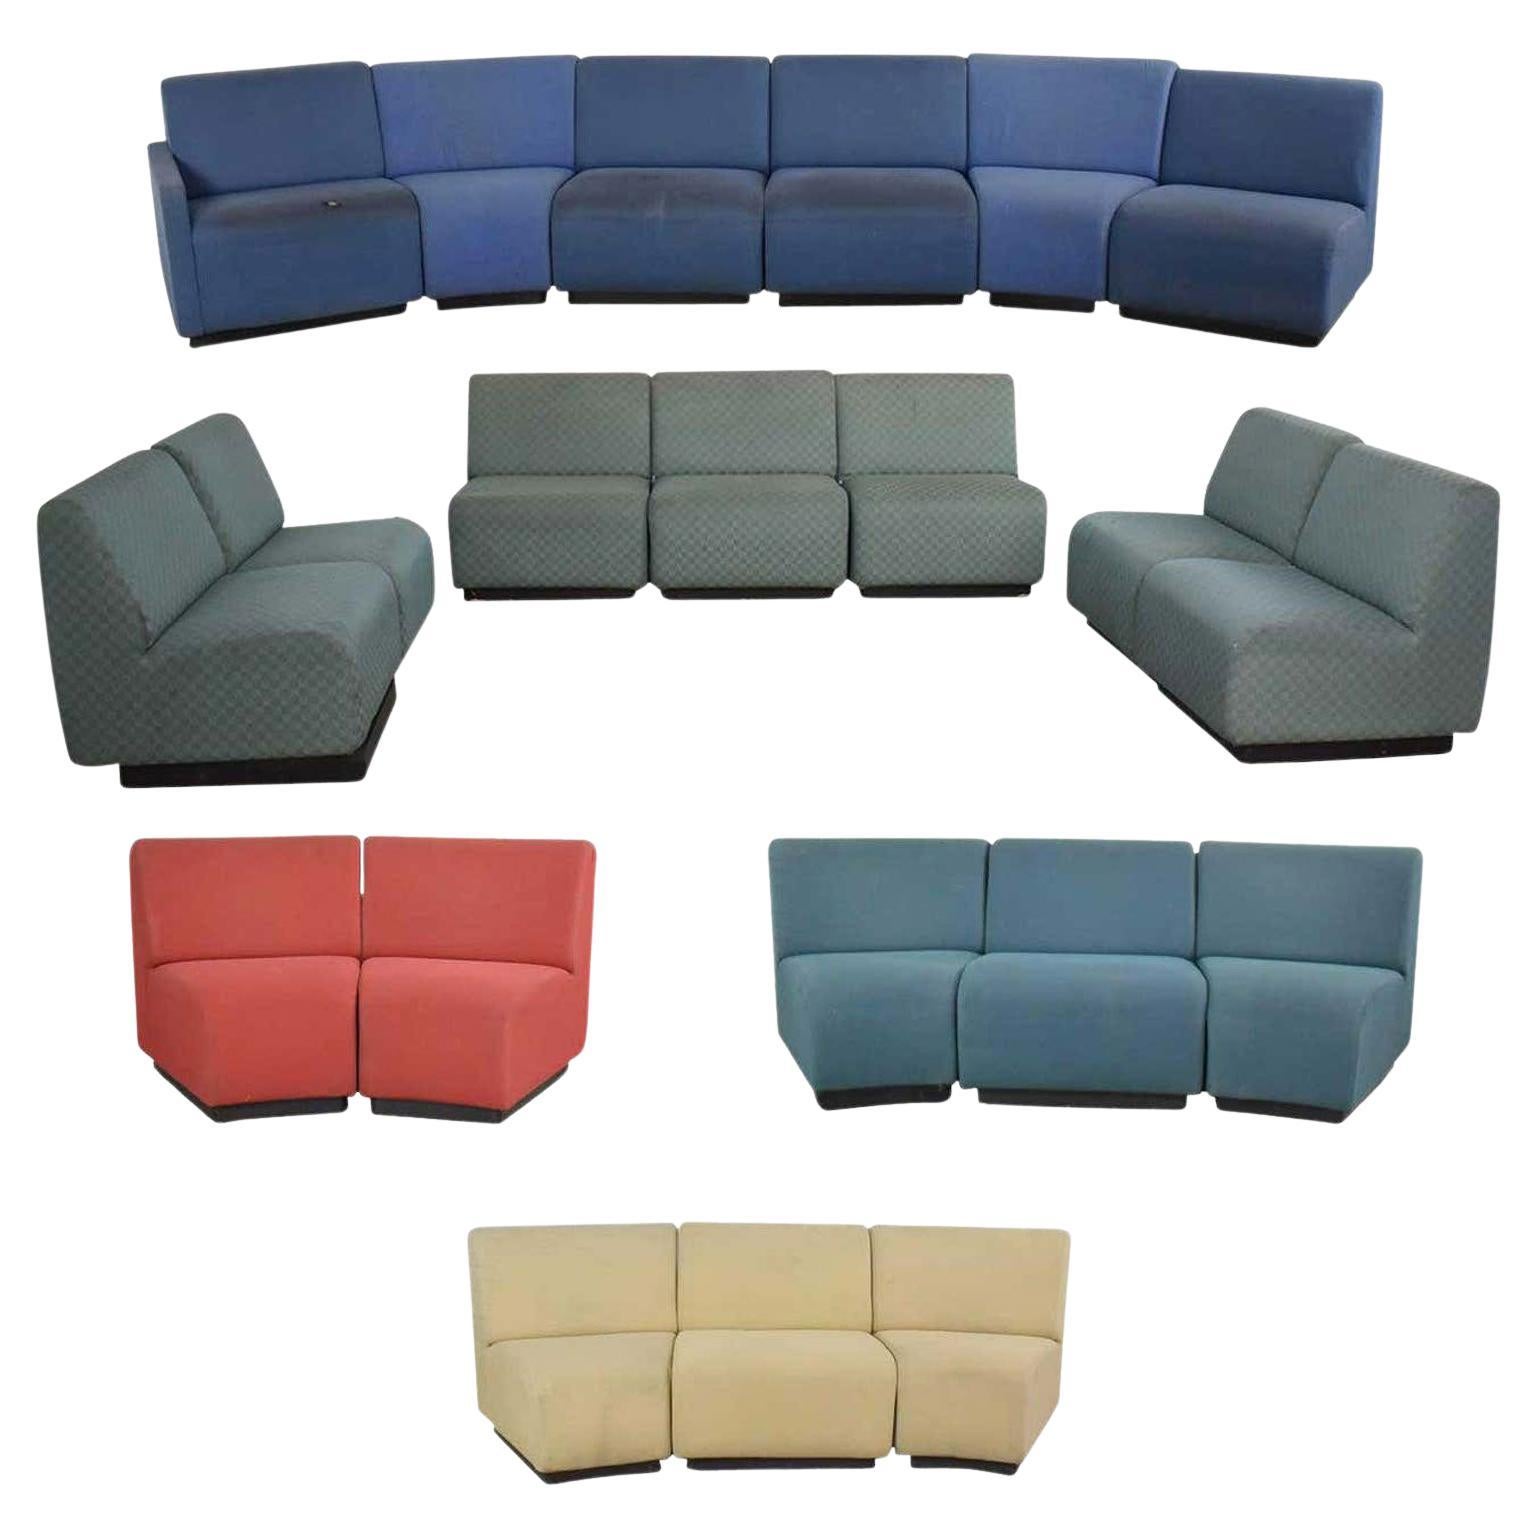 August Inc Modernity Modular Sectional Sofa Straight & Wedge Pieces Style Chadwick